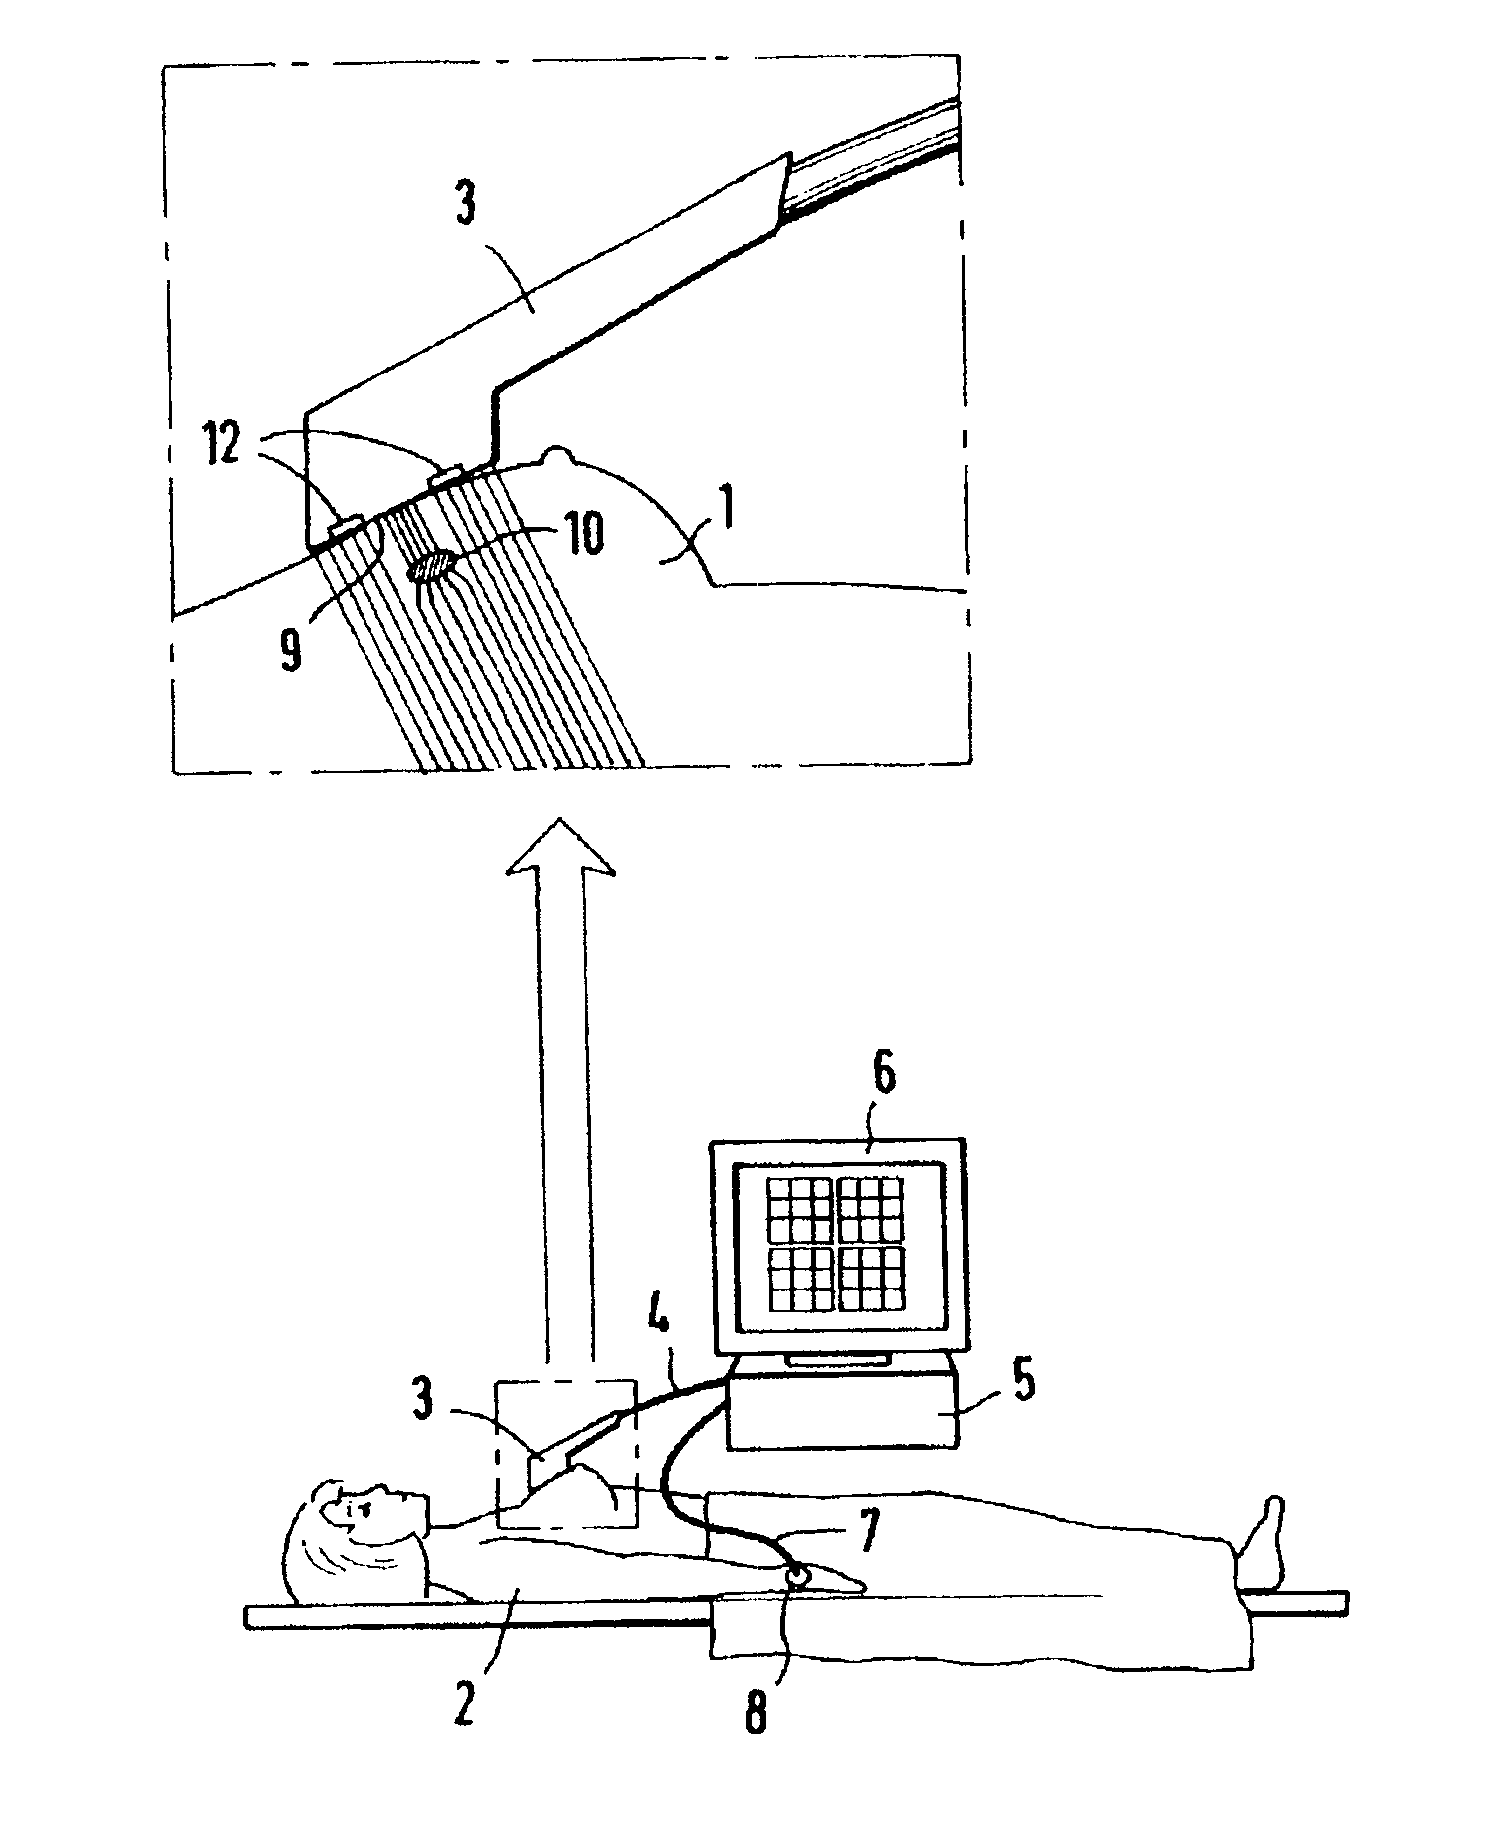 Combined electrical impedance and ultrasound scanner